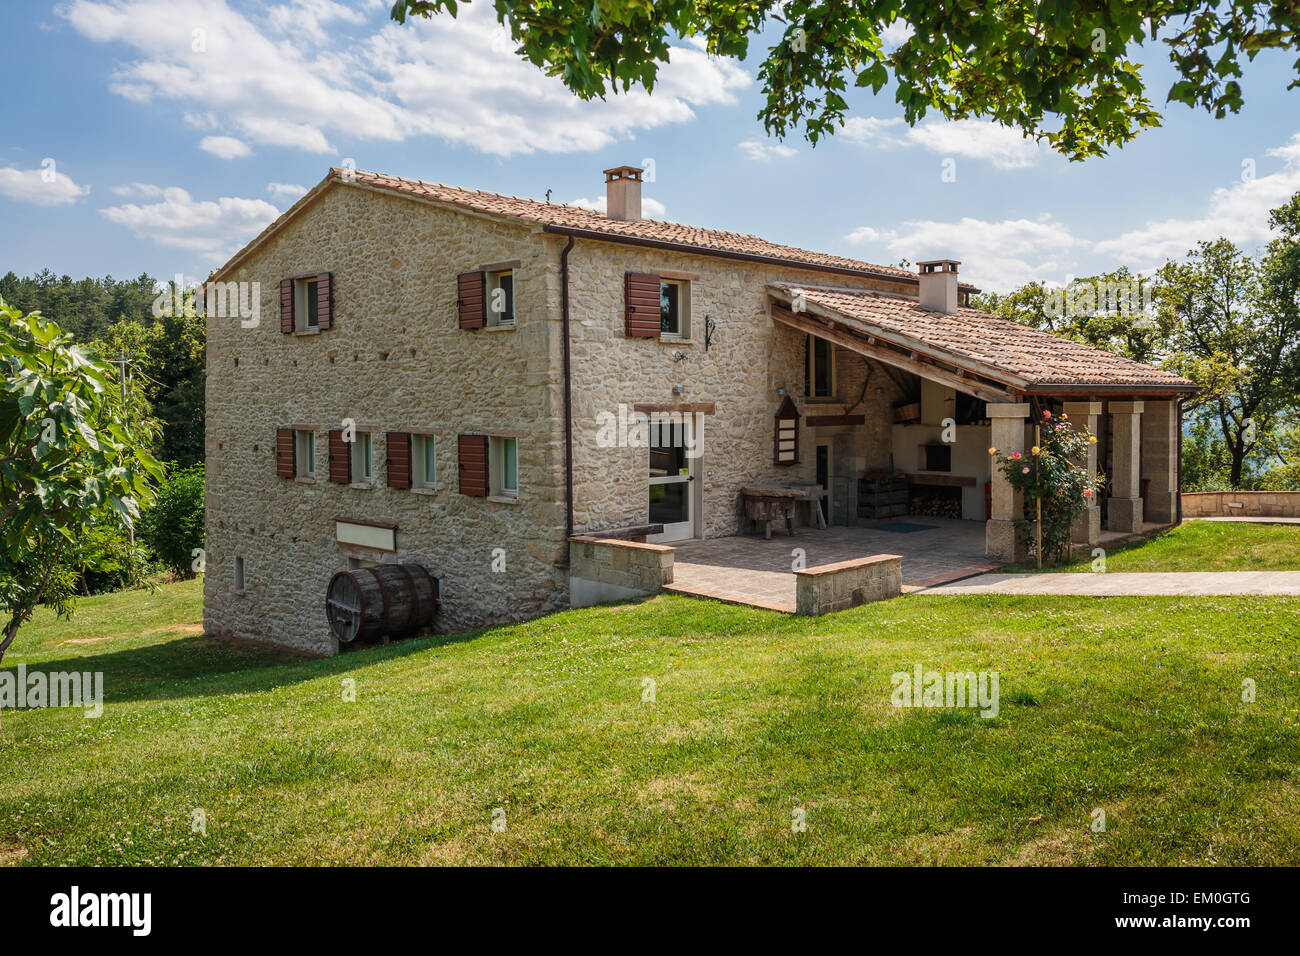 Old typical Tuscan farmhouse in Italy Stock Photo